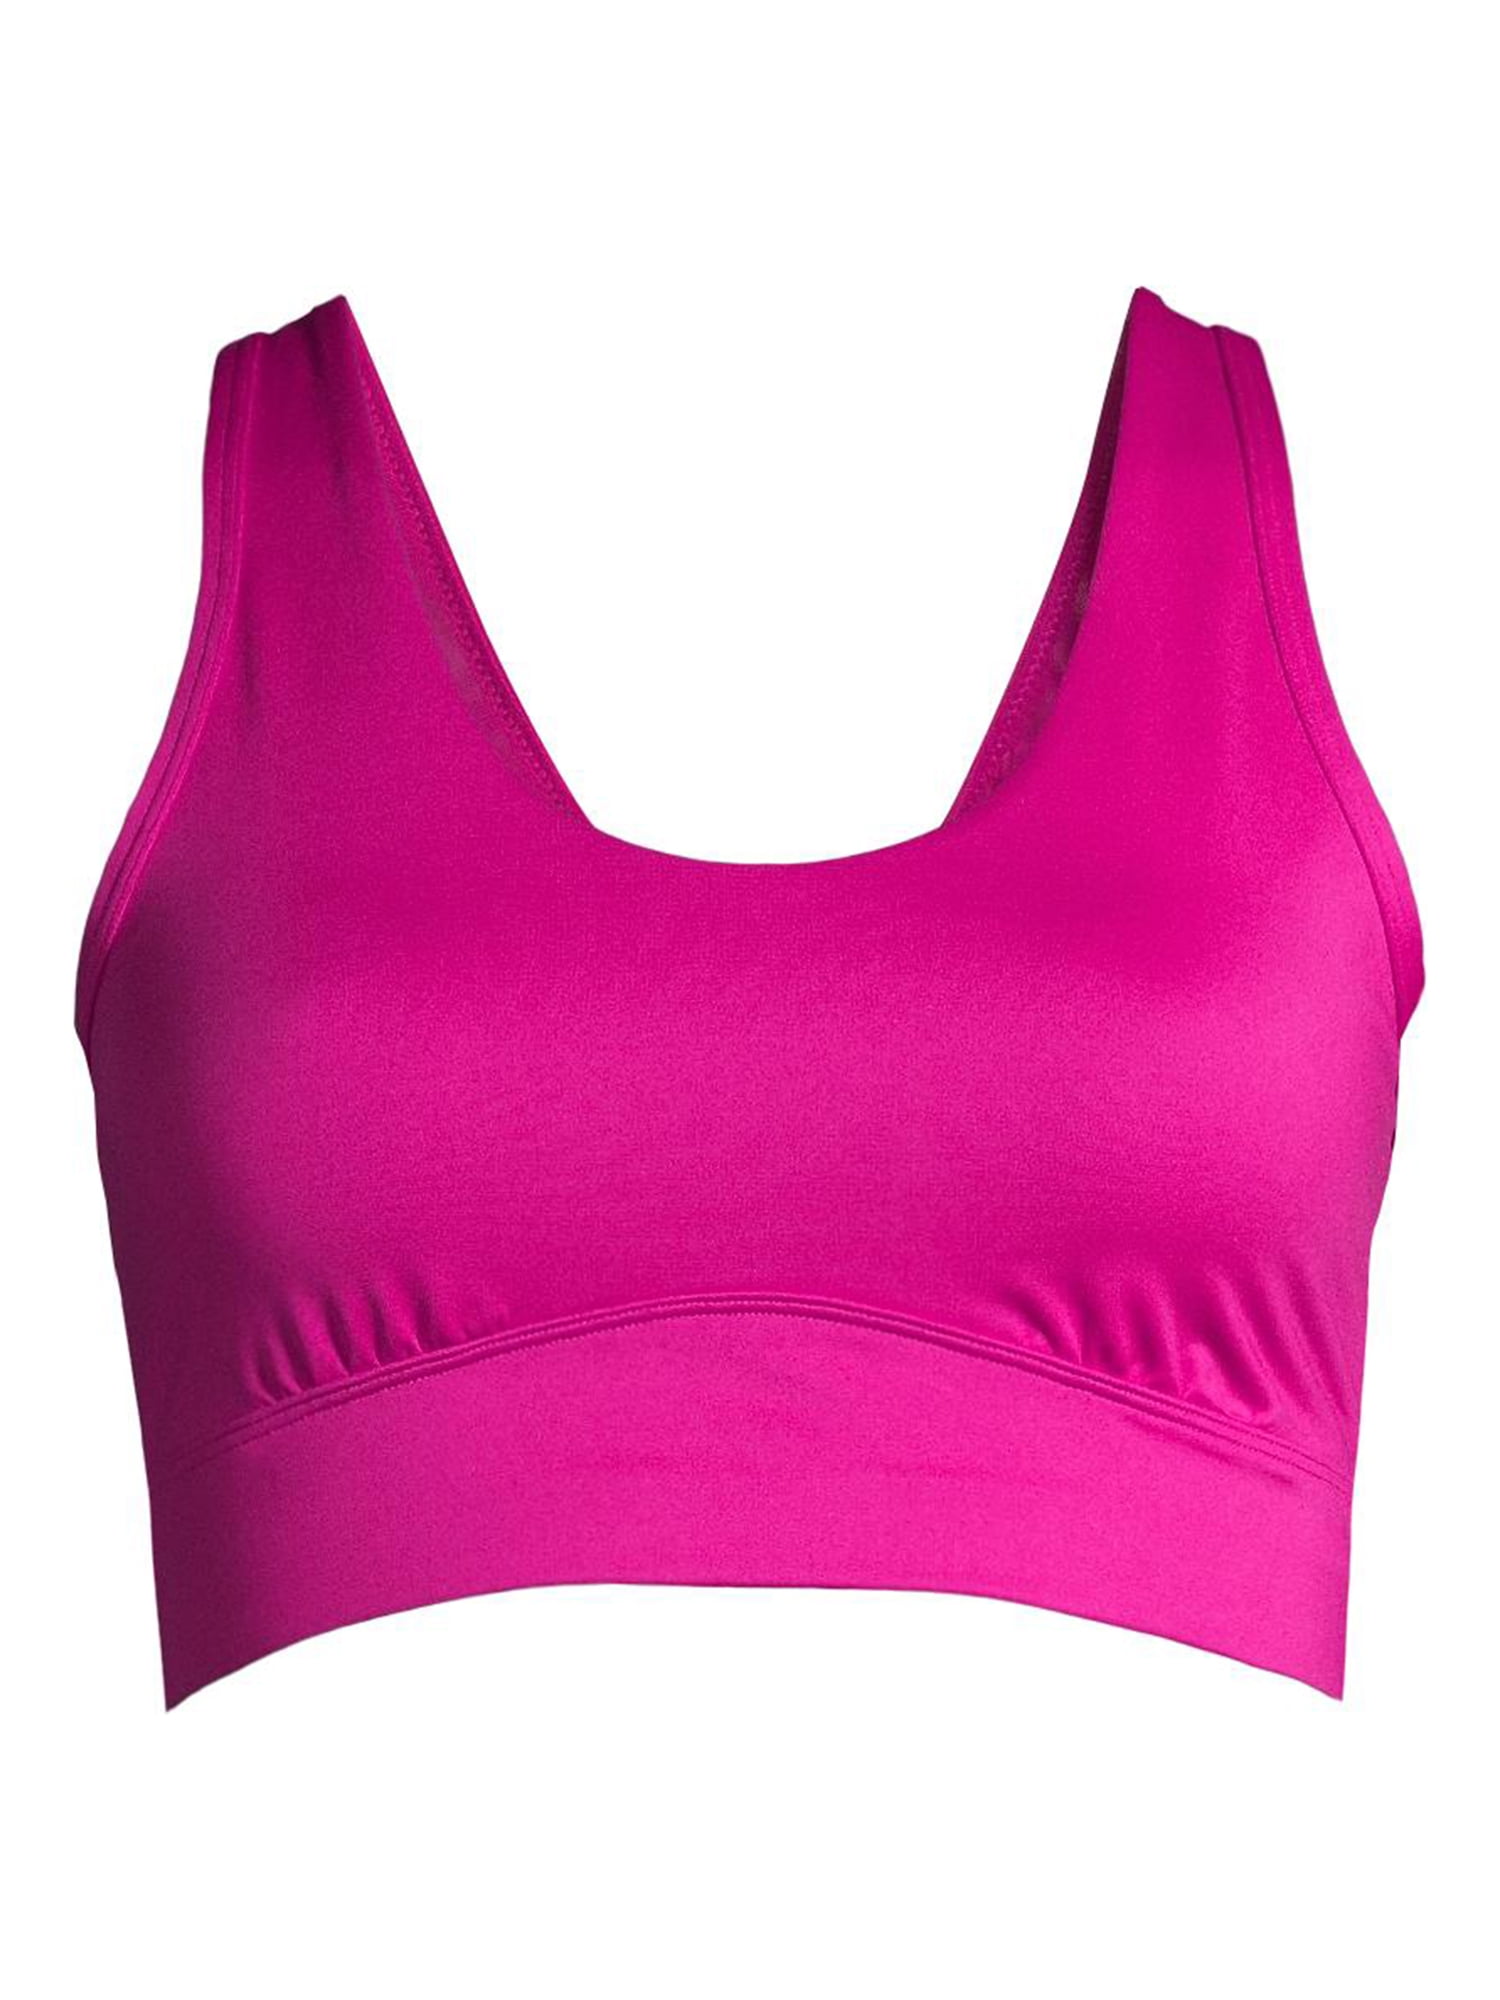 Savvi Fit Swallow Pink Sports Bra Size L With Removable Cups NWT